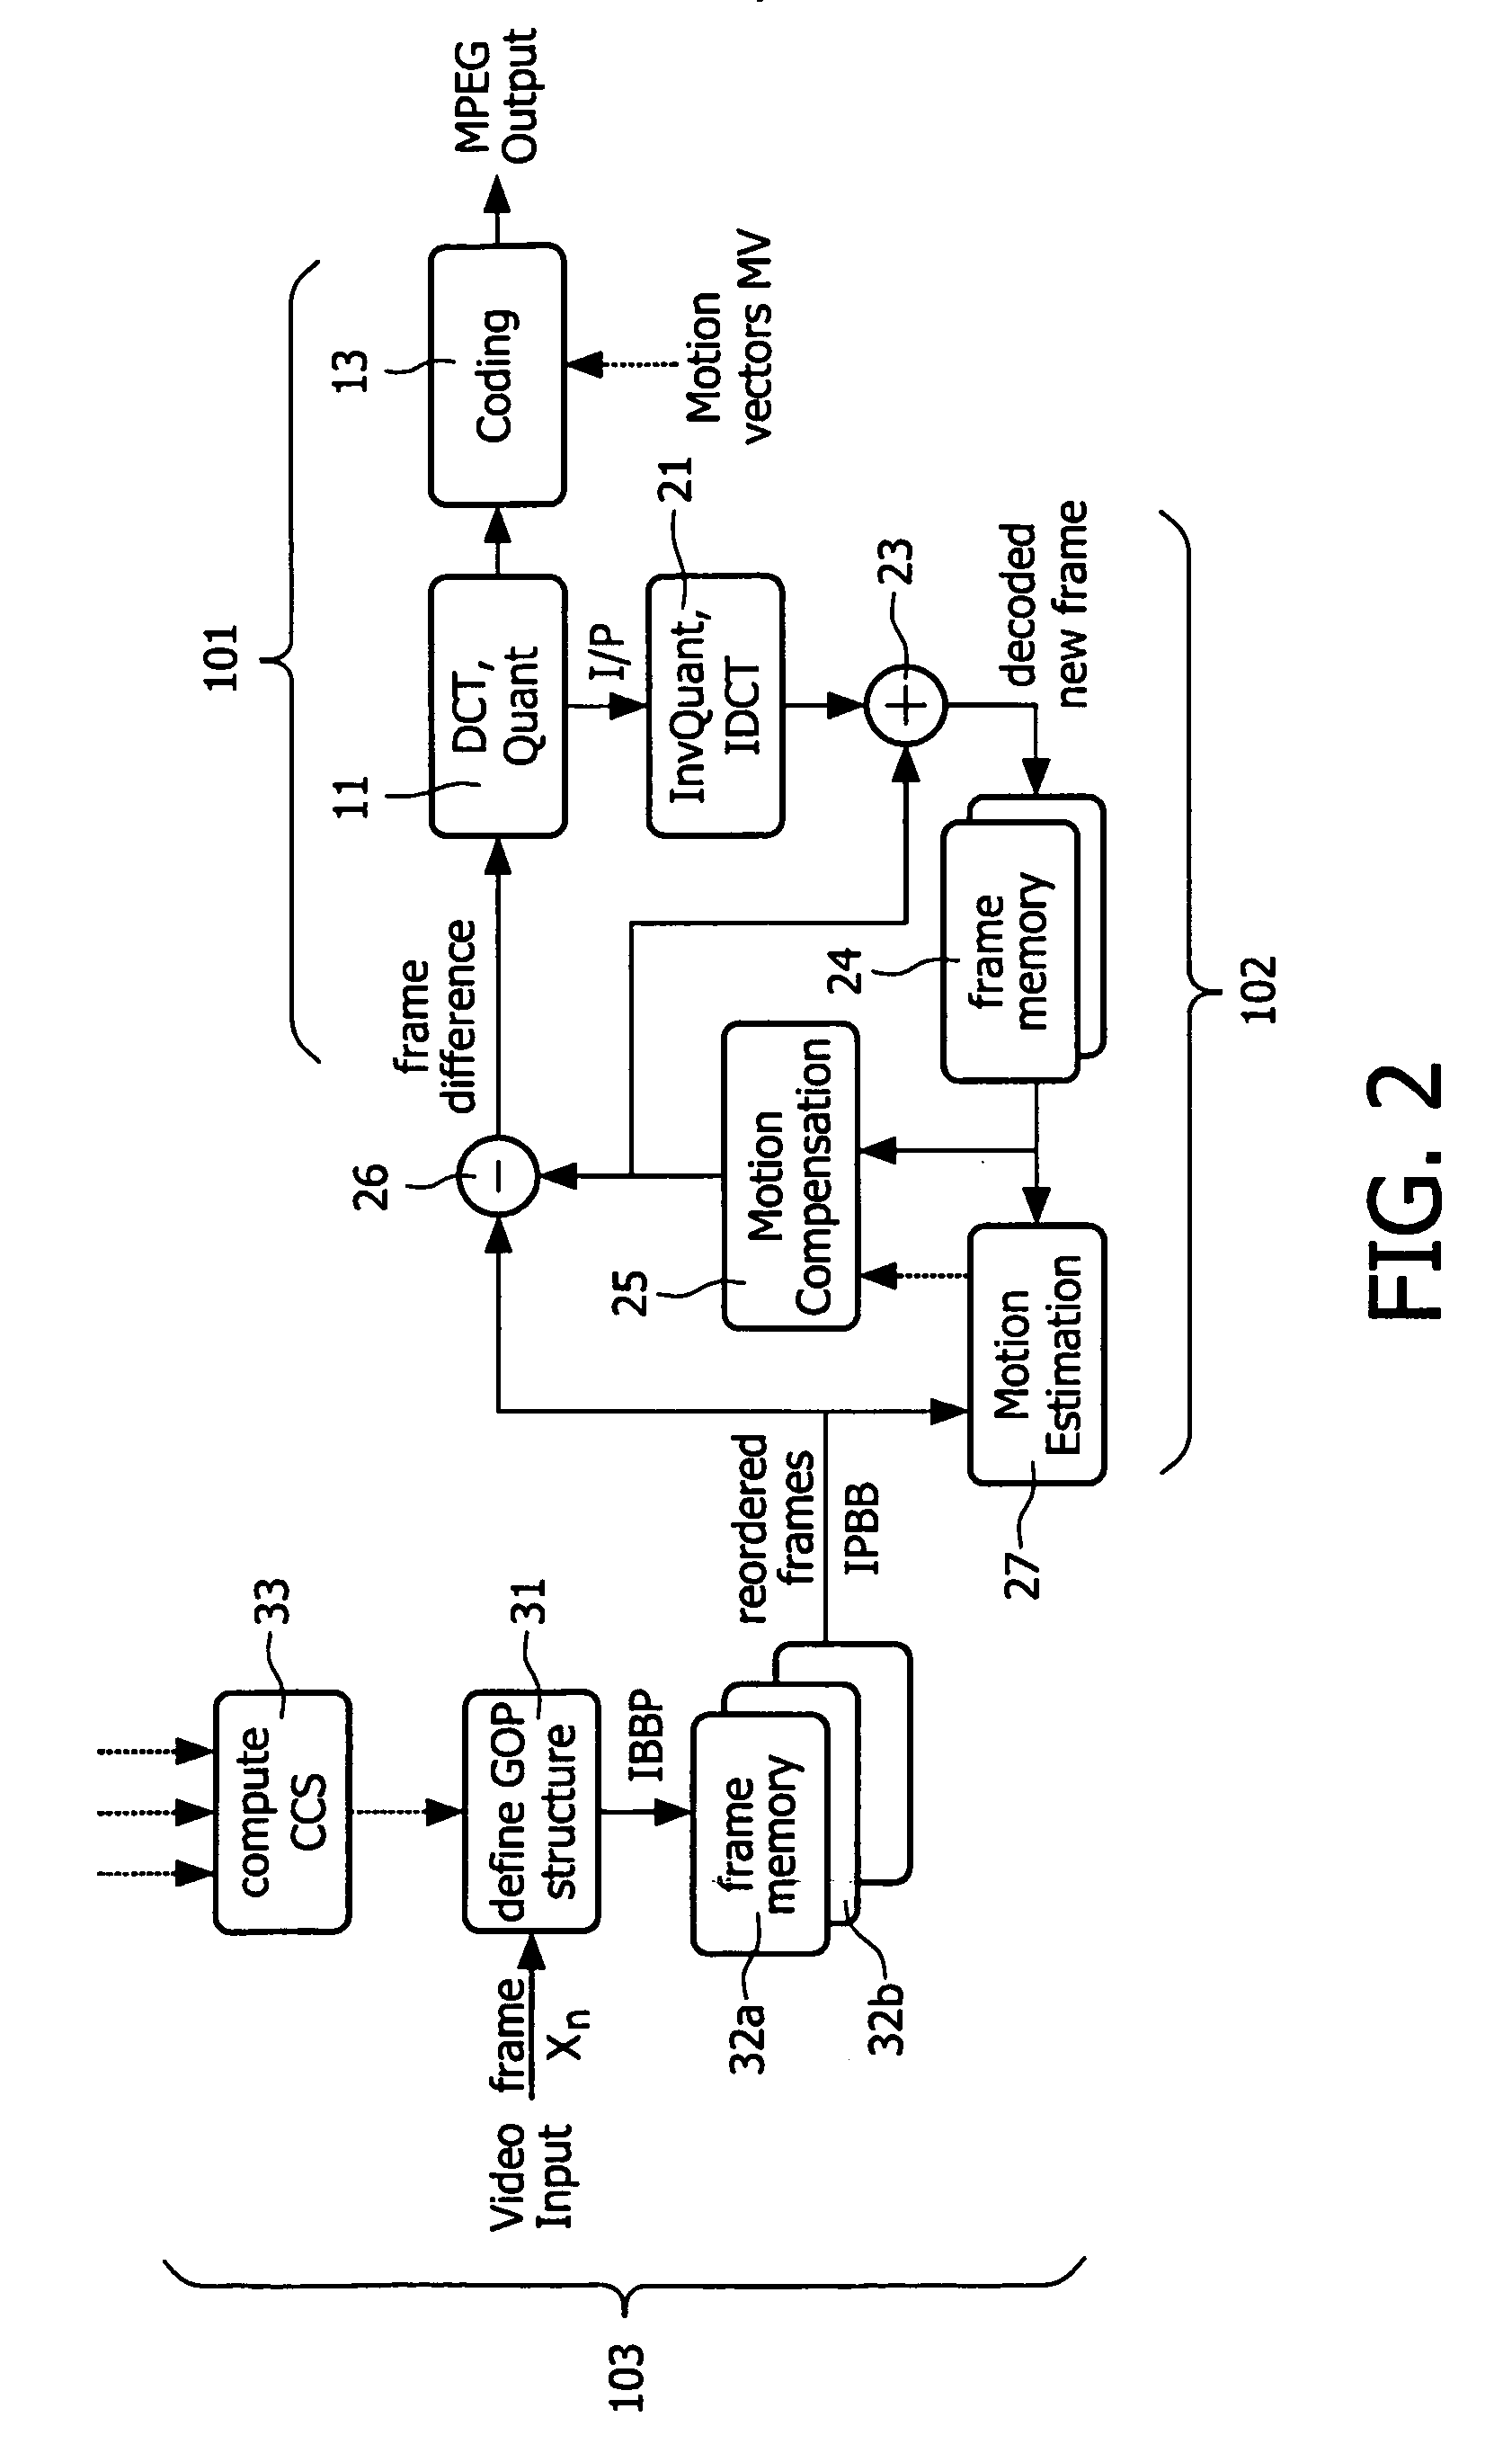 Video encoding method and device